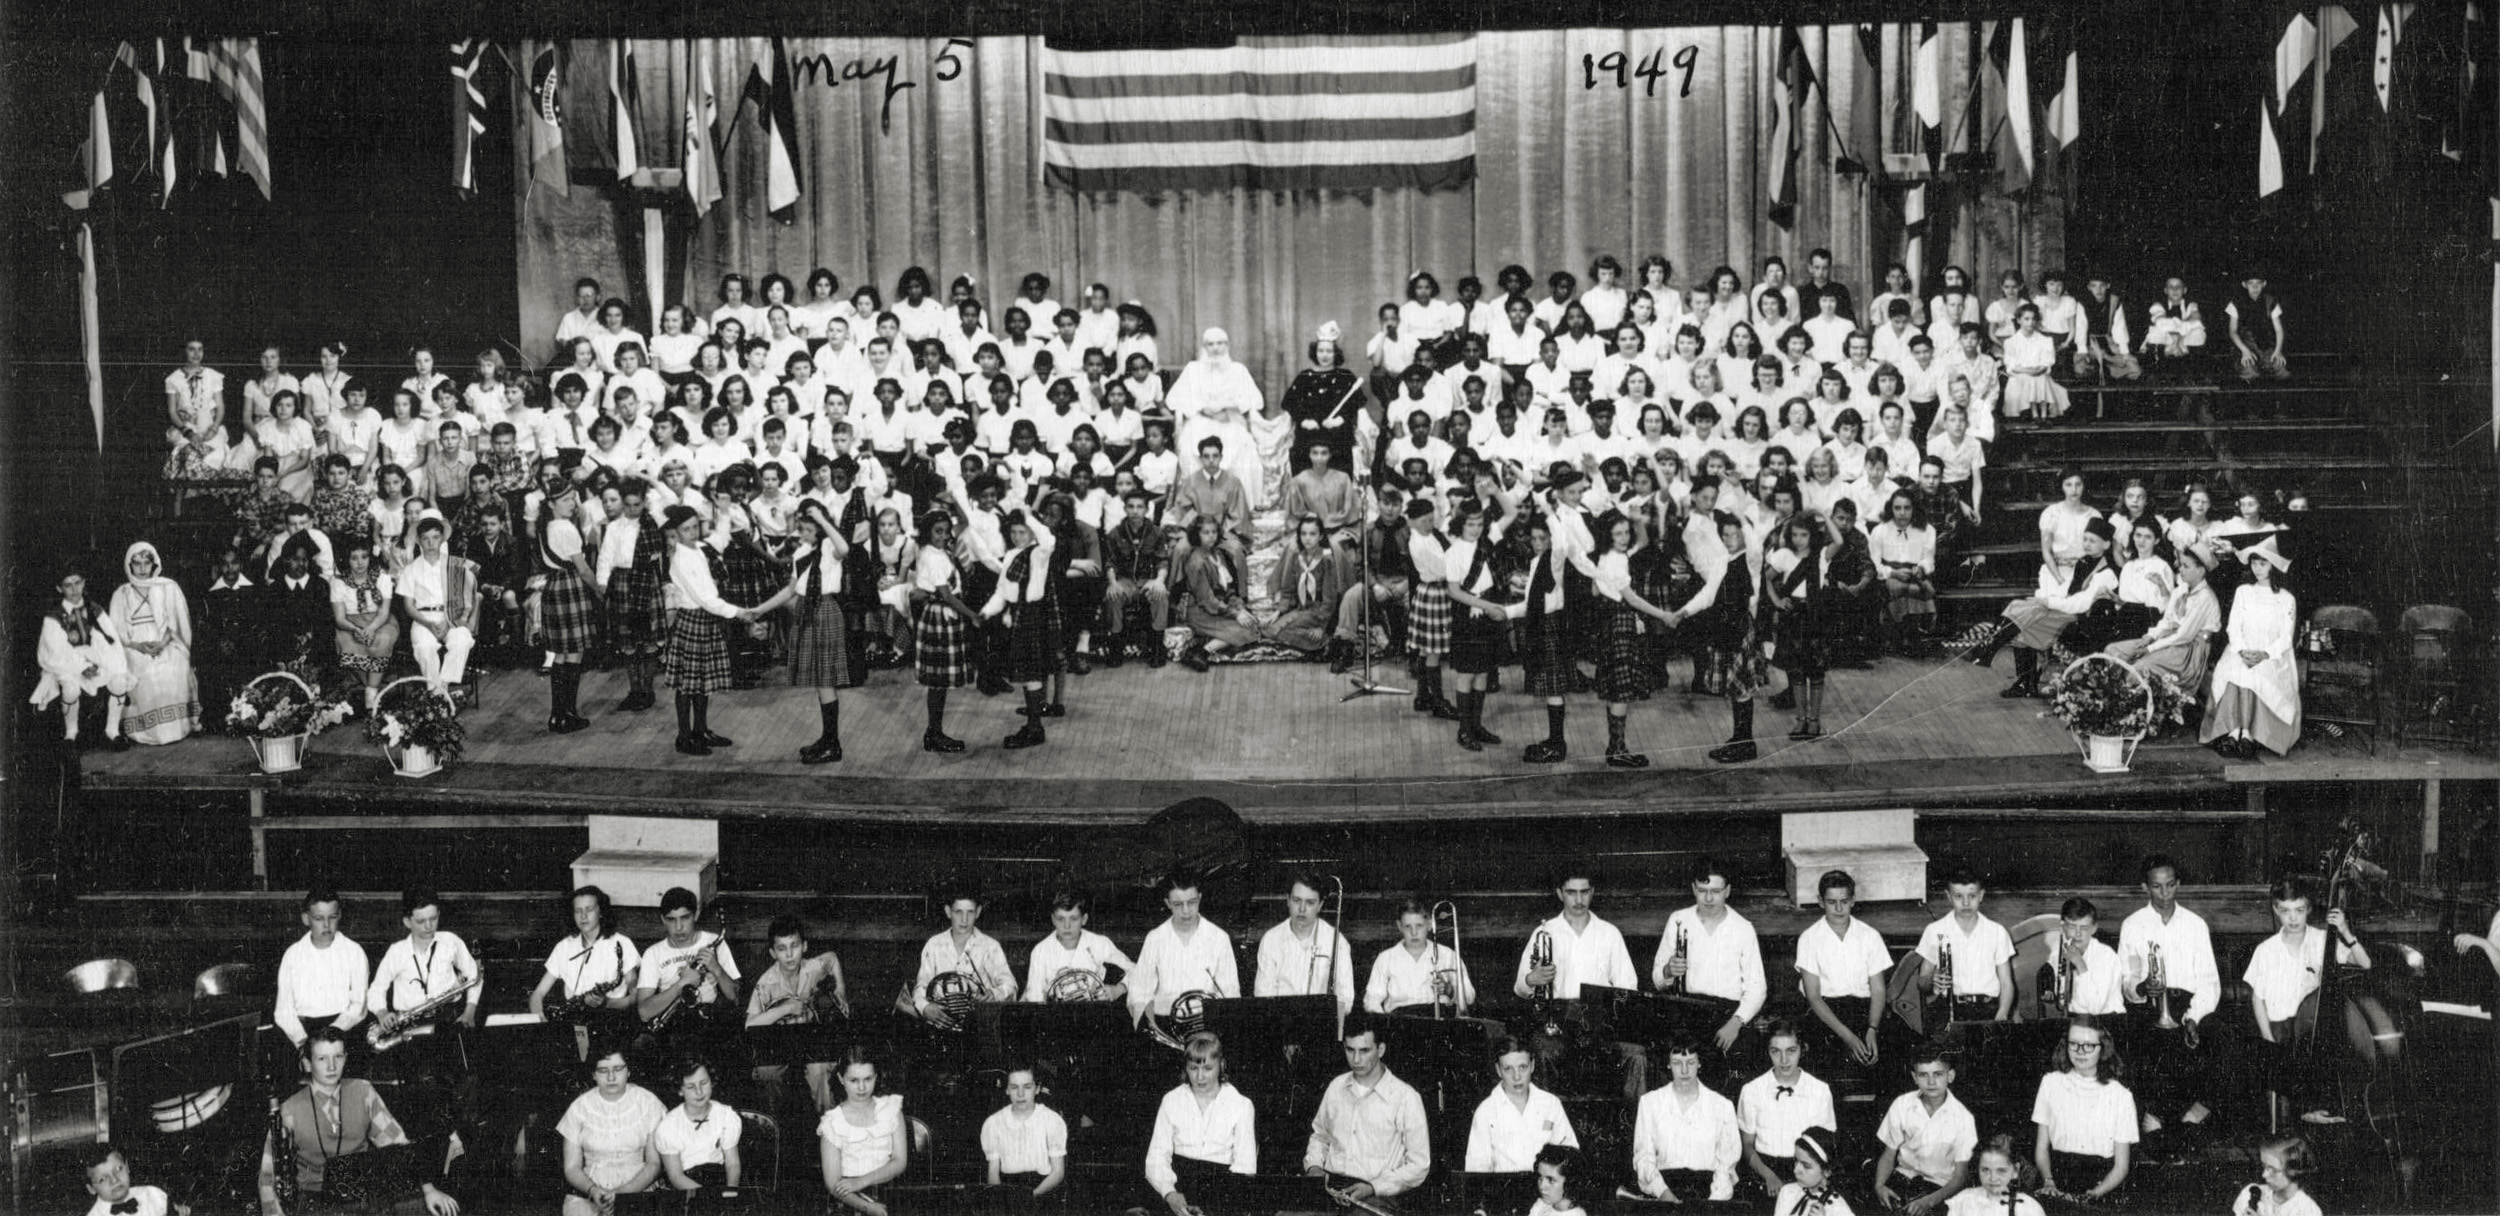 Youth concert held in Memorial Hall, Dayton, Ohio on May 5, 1949. My father was in the 7th or 8th grade at Jackson School and also a Boy Scout; he's sitting next to a Girl Scout (the foot of the microphone stand points to his right foot).  The group was made up of students selected from all the public schools. My father is unable to remember the theme for this concert. View full size.